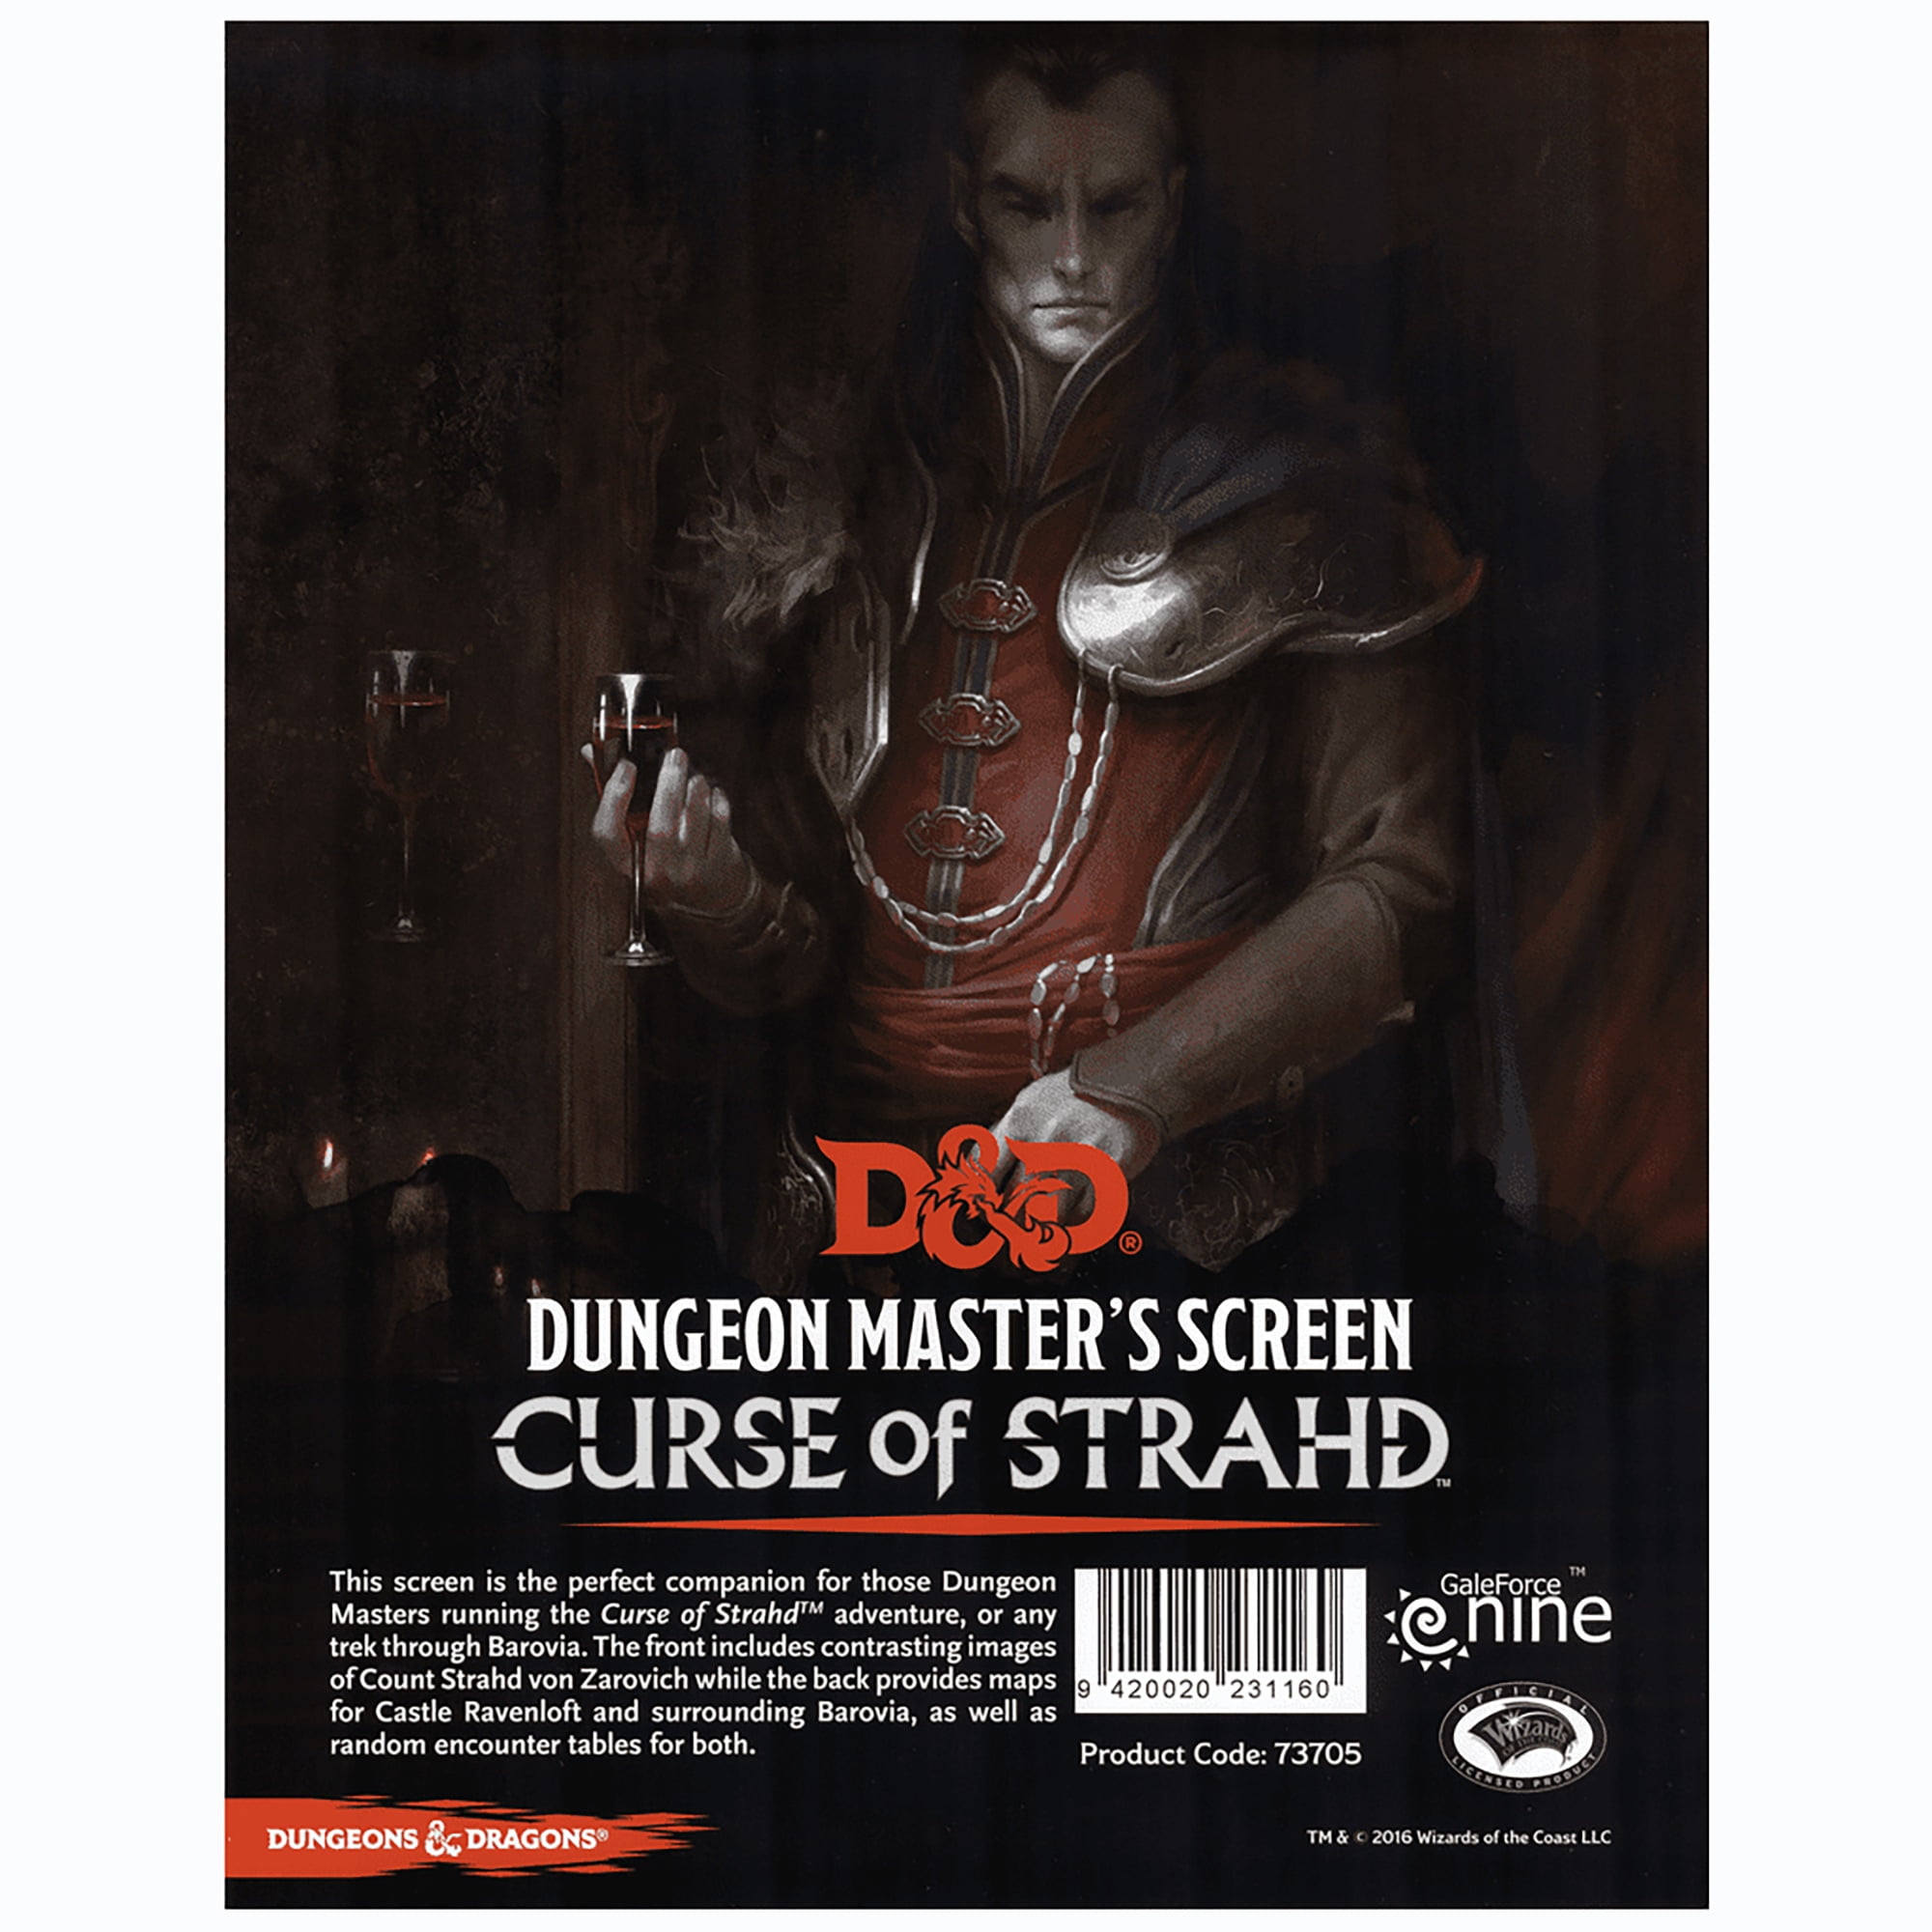 D&D: Curse of Strahd - Dungeon Master's Screen - Tabletop RPG DM